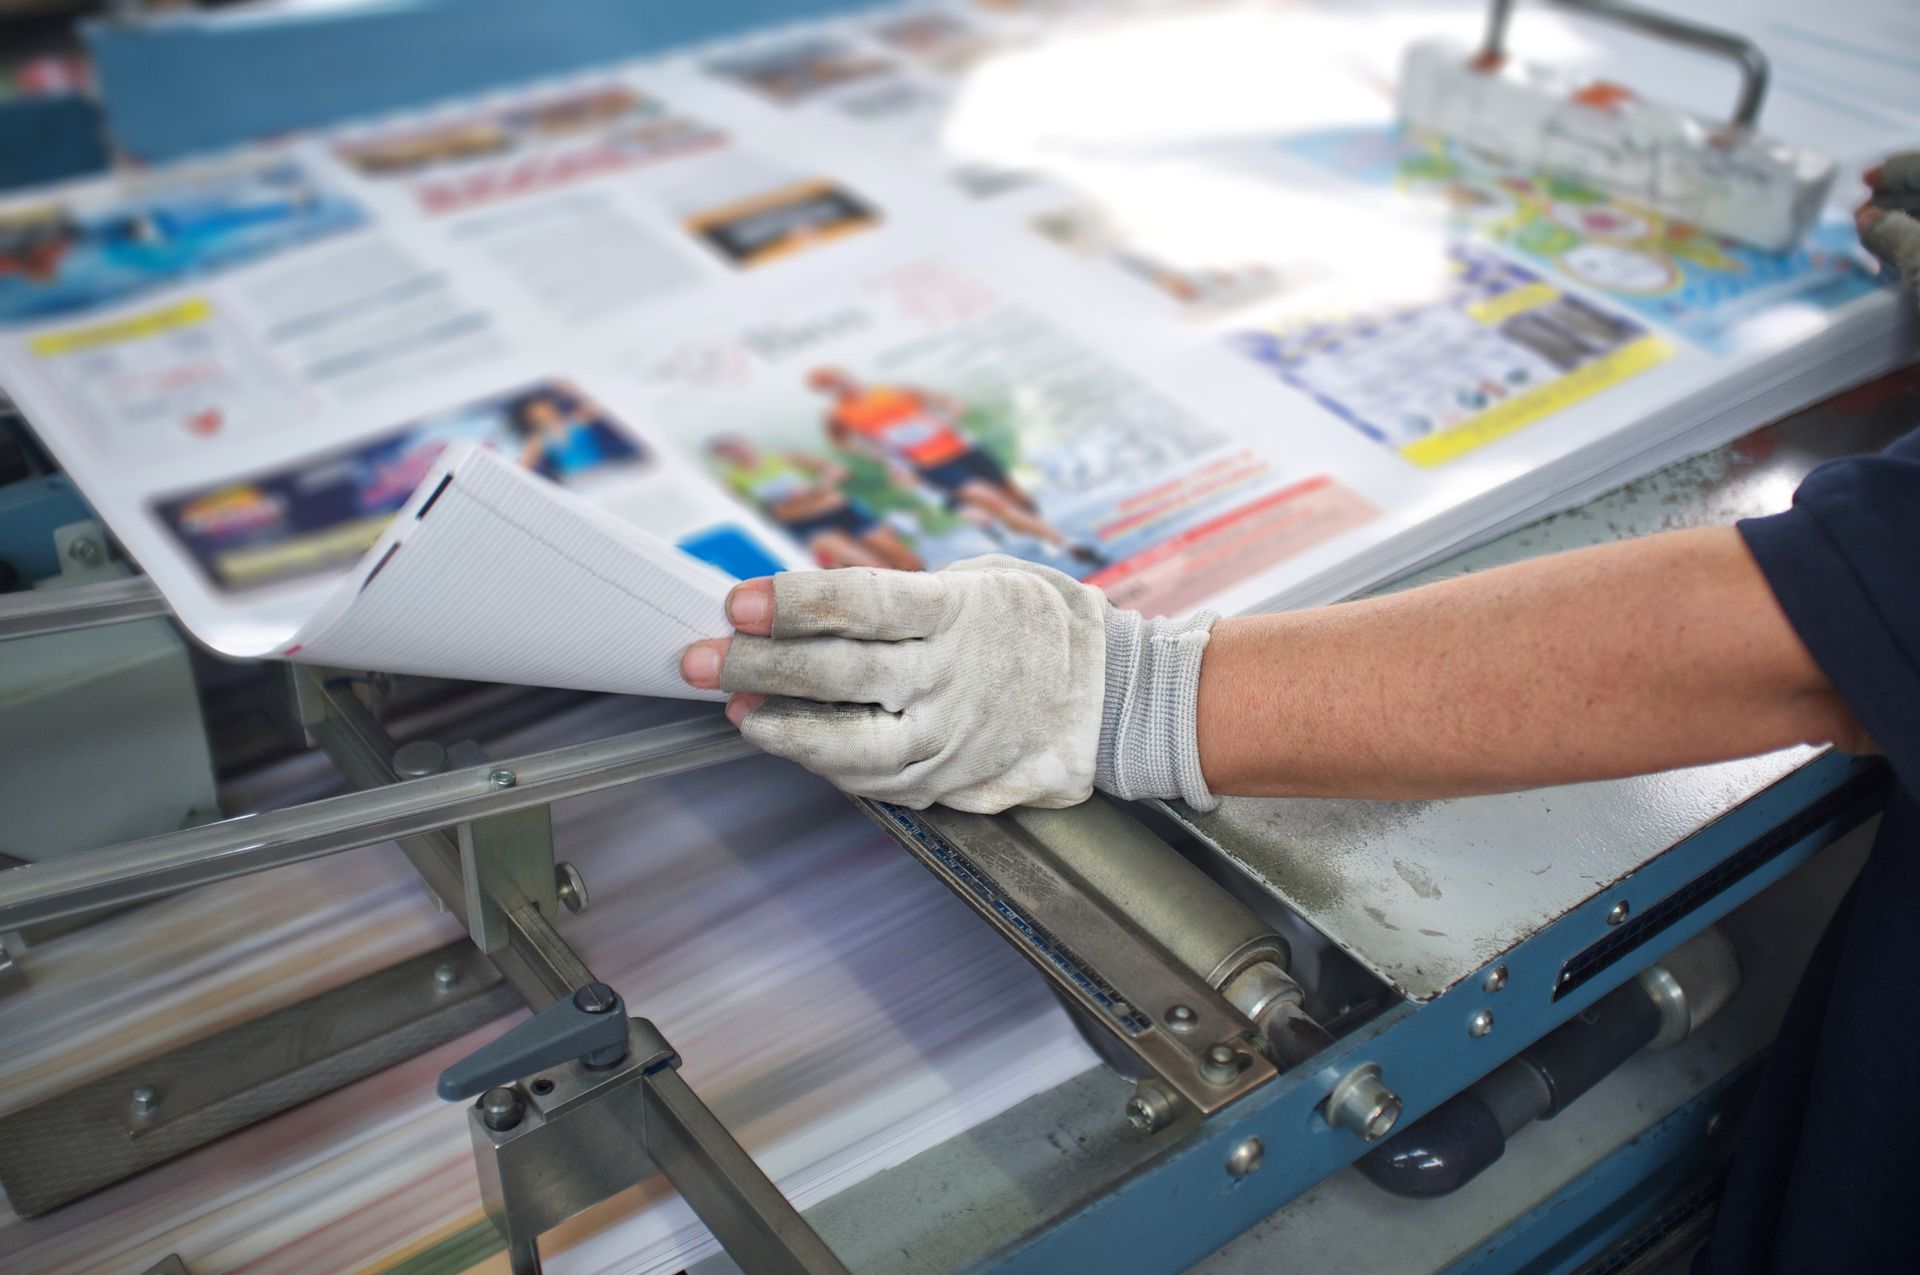 Foothill Ranch Commercial Printing